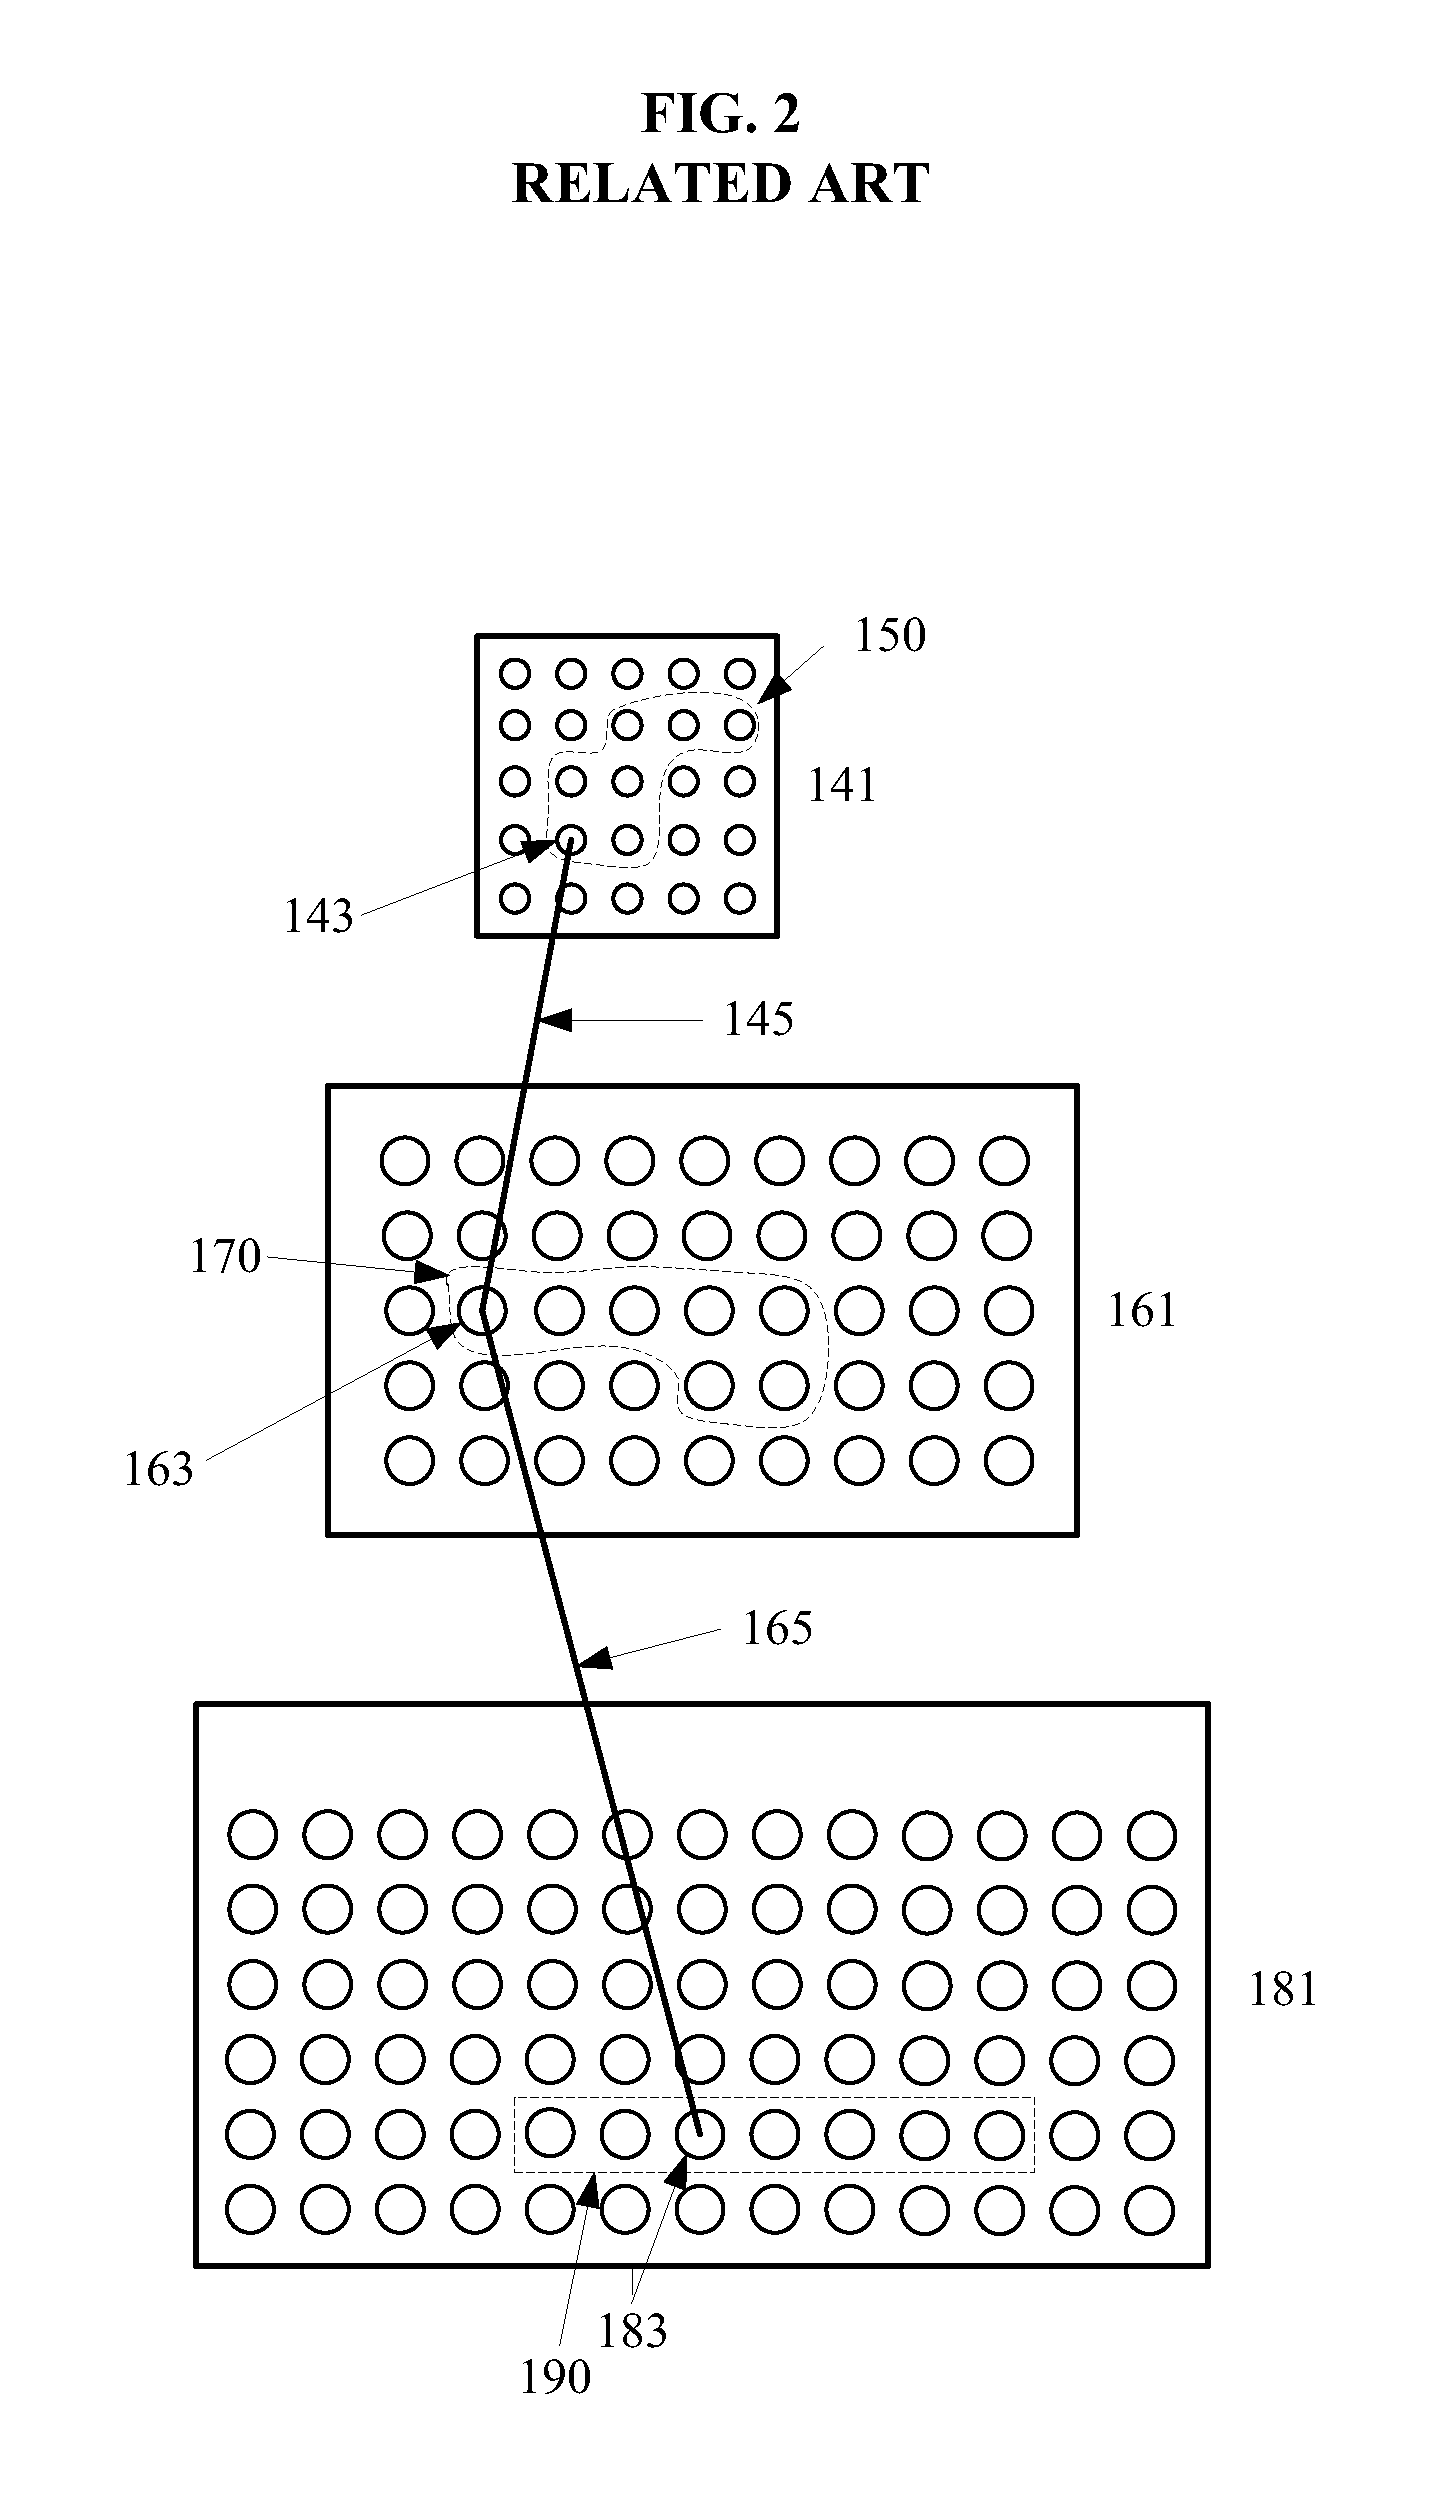 Method and system for specifying system level constraints in a cross-fabric design environment